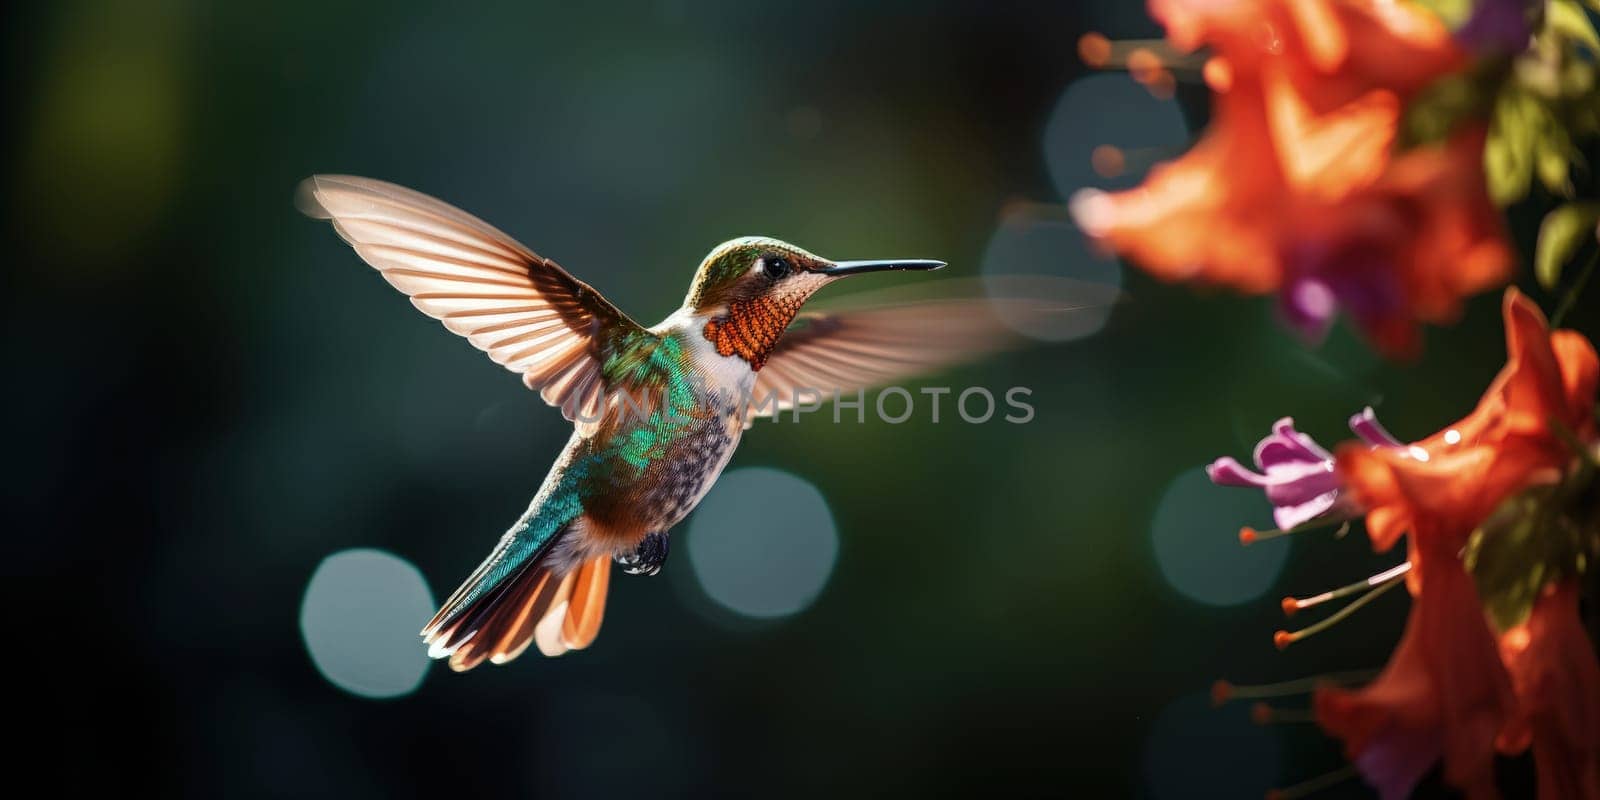 hummingbird in flight, wings oscillating in a frozen moment of motion by Kadula